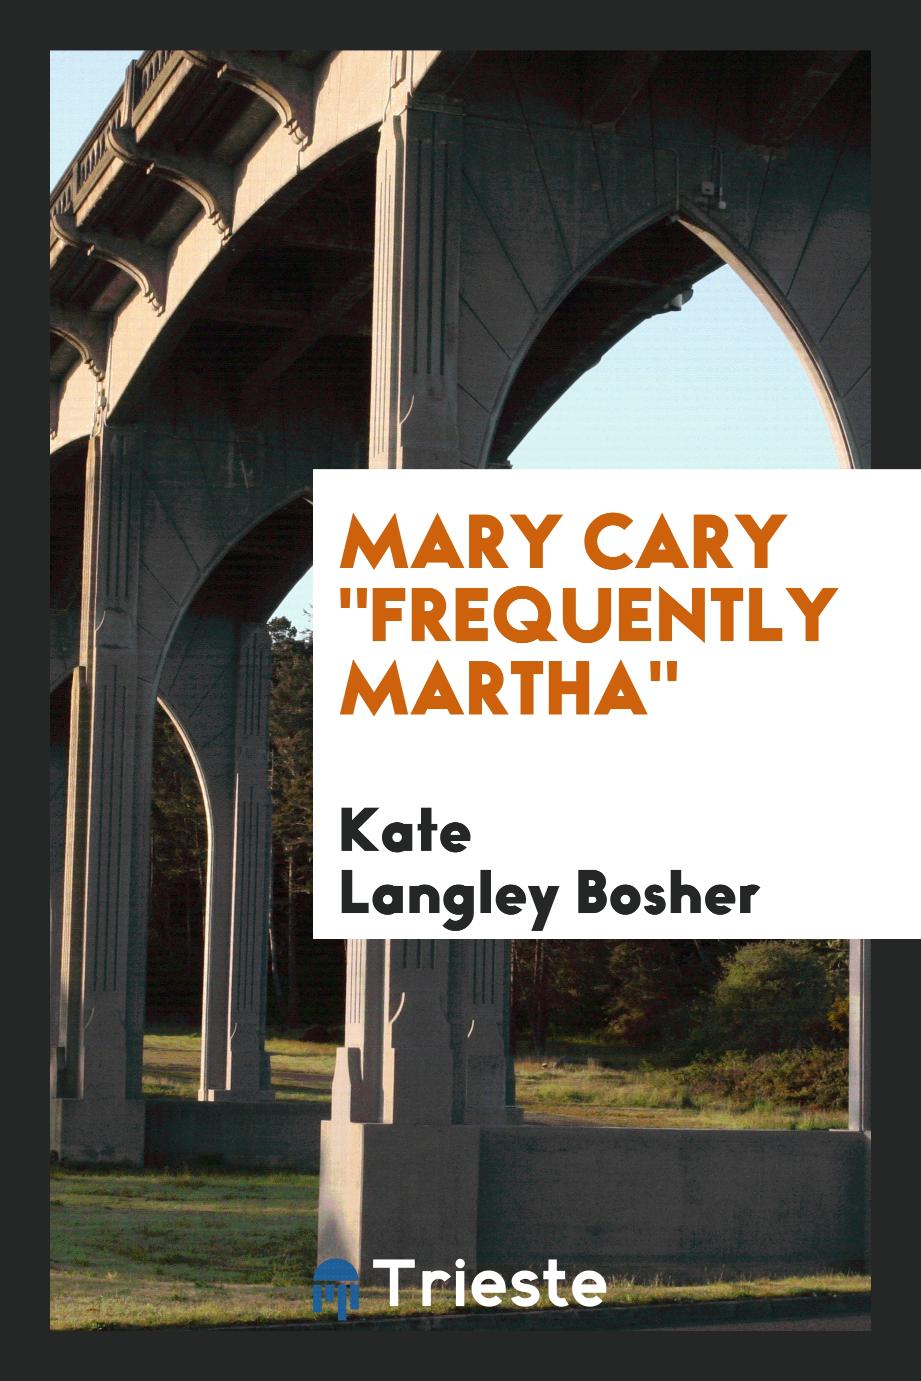 Mary Cary "Frequently Martha"